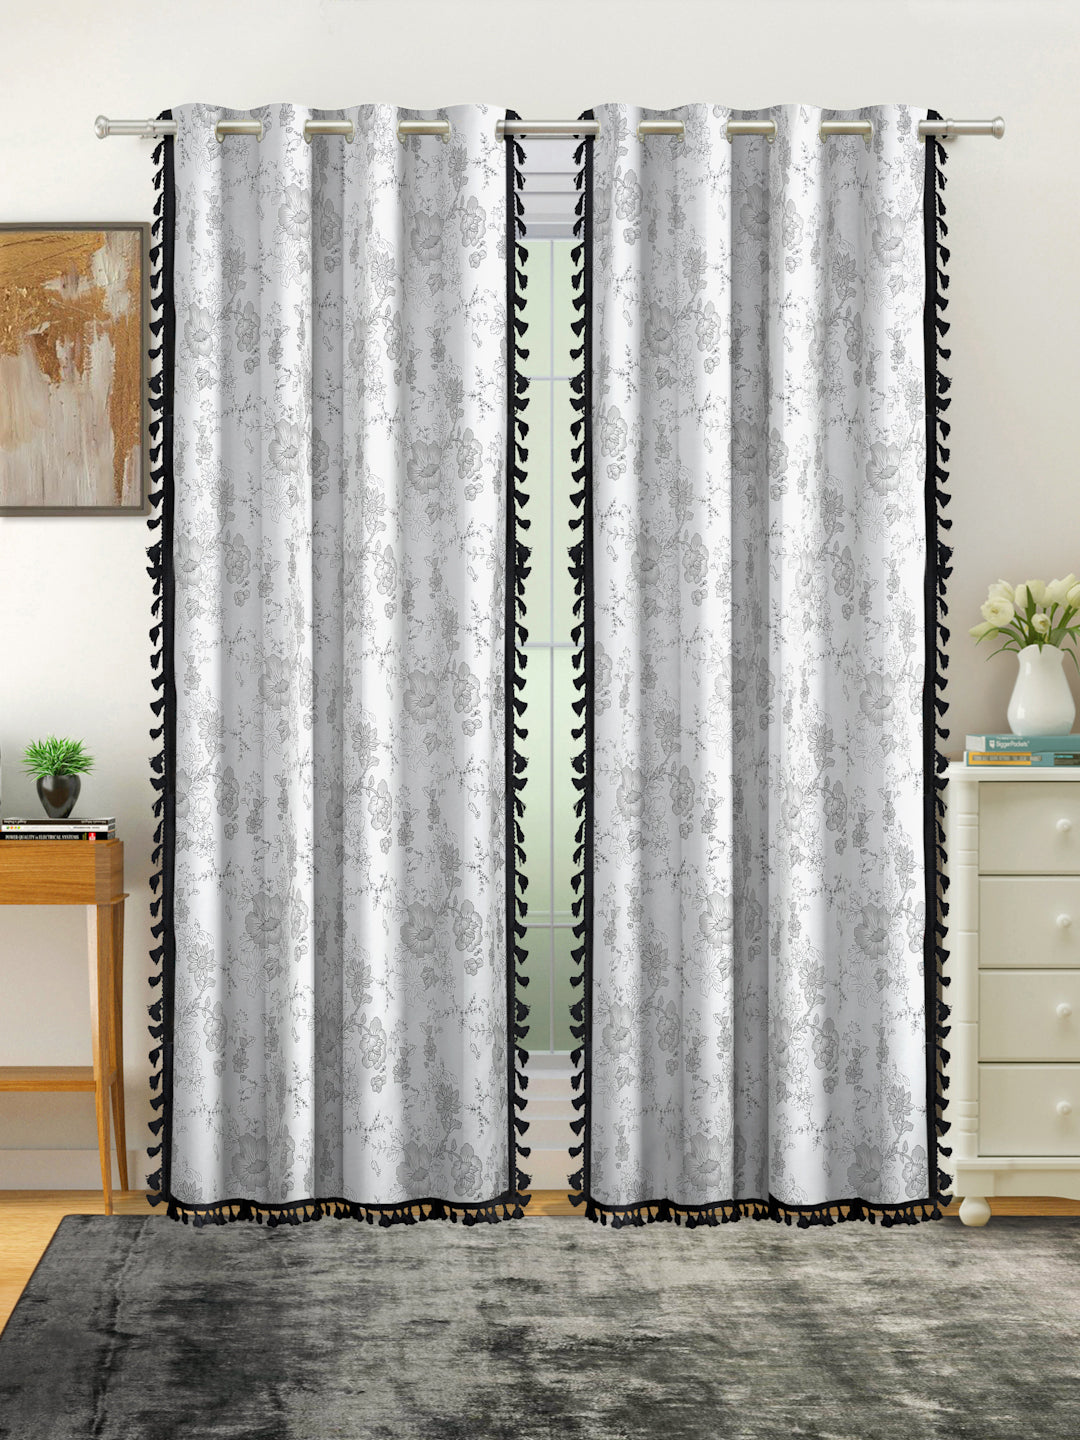 Cotton Printed Boho Light Filtering Door Curtain with Lace- Cream (Pack of 2)